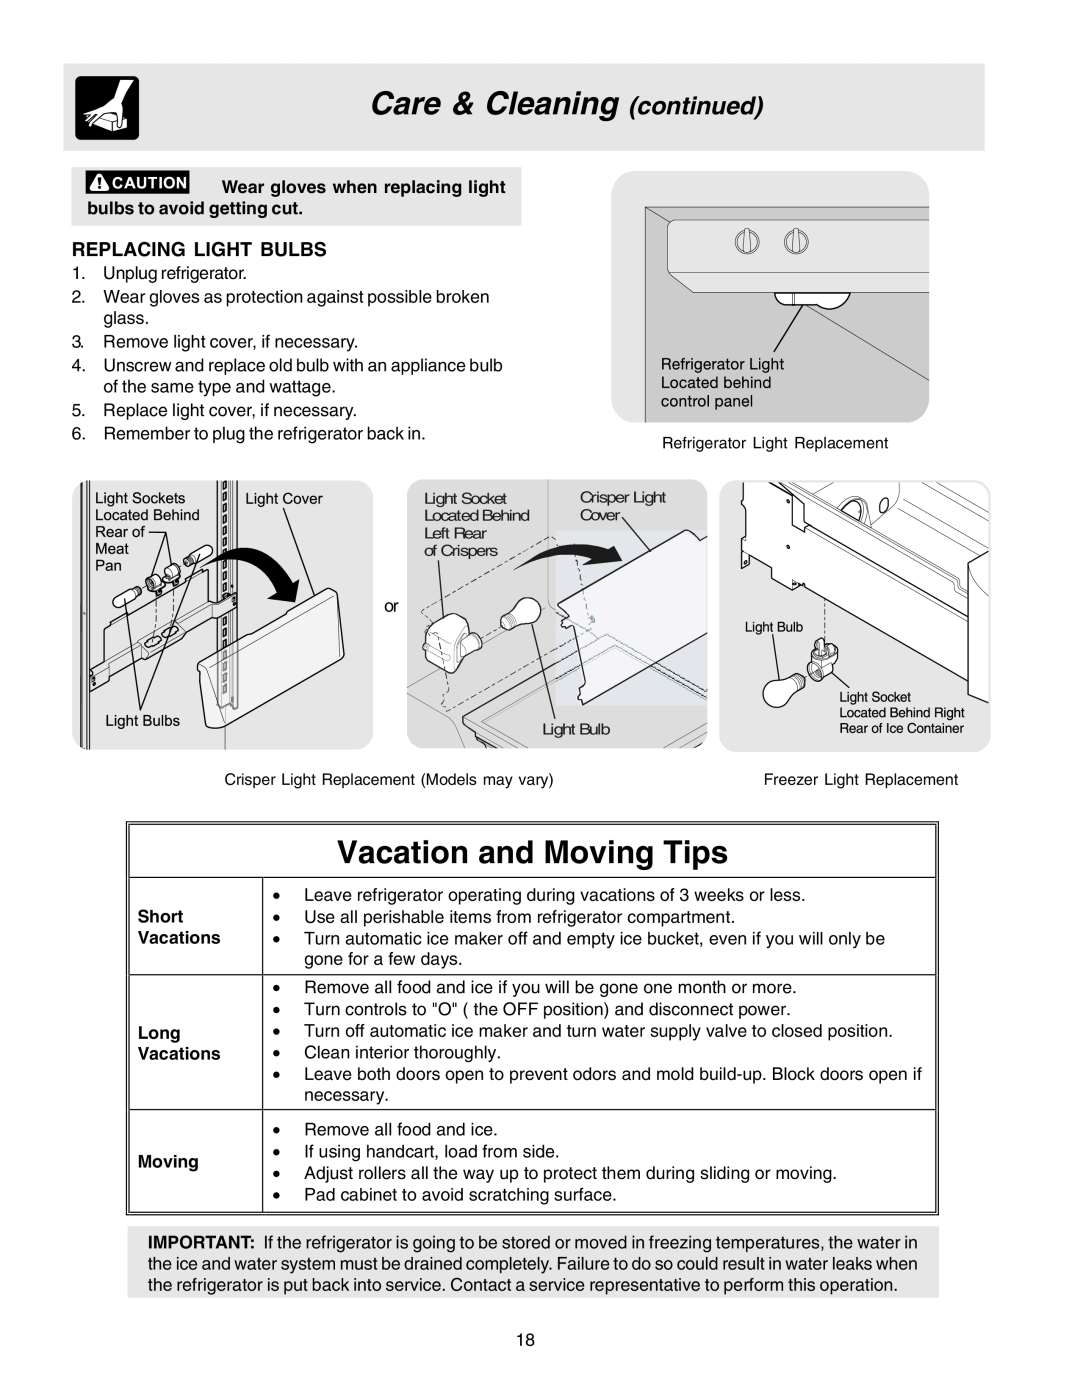 Electrolux - Gibson 241512200 manual Care & Cleaning continued, Vacation and Moving Tips, Replacing Light Bulbs 